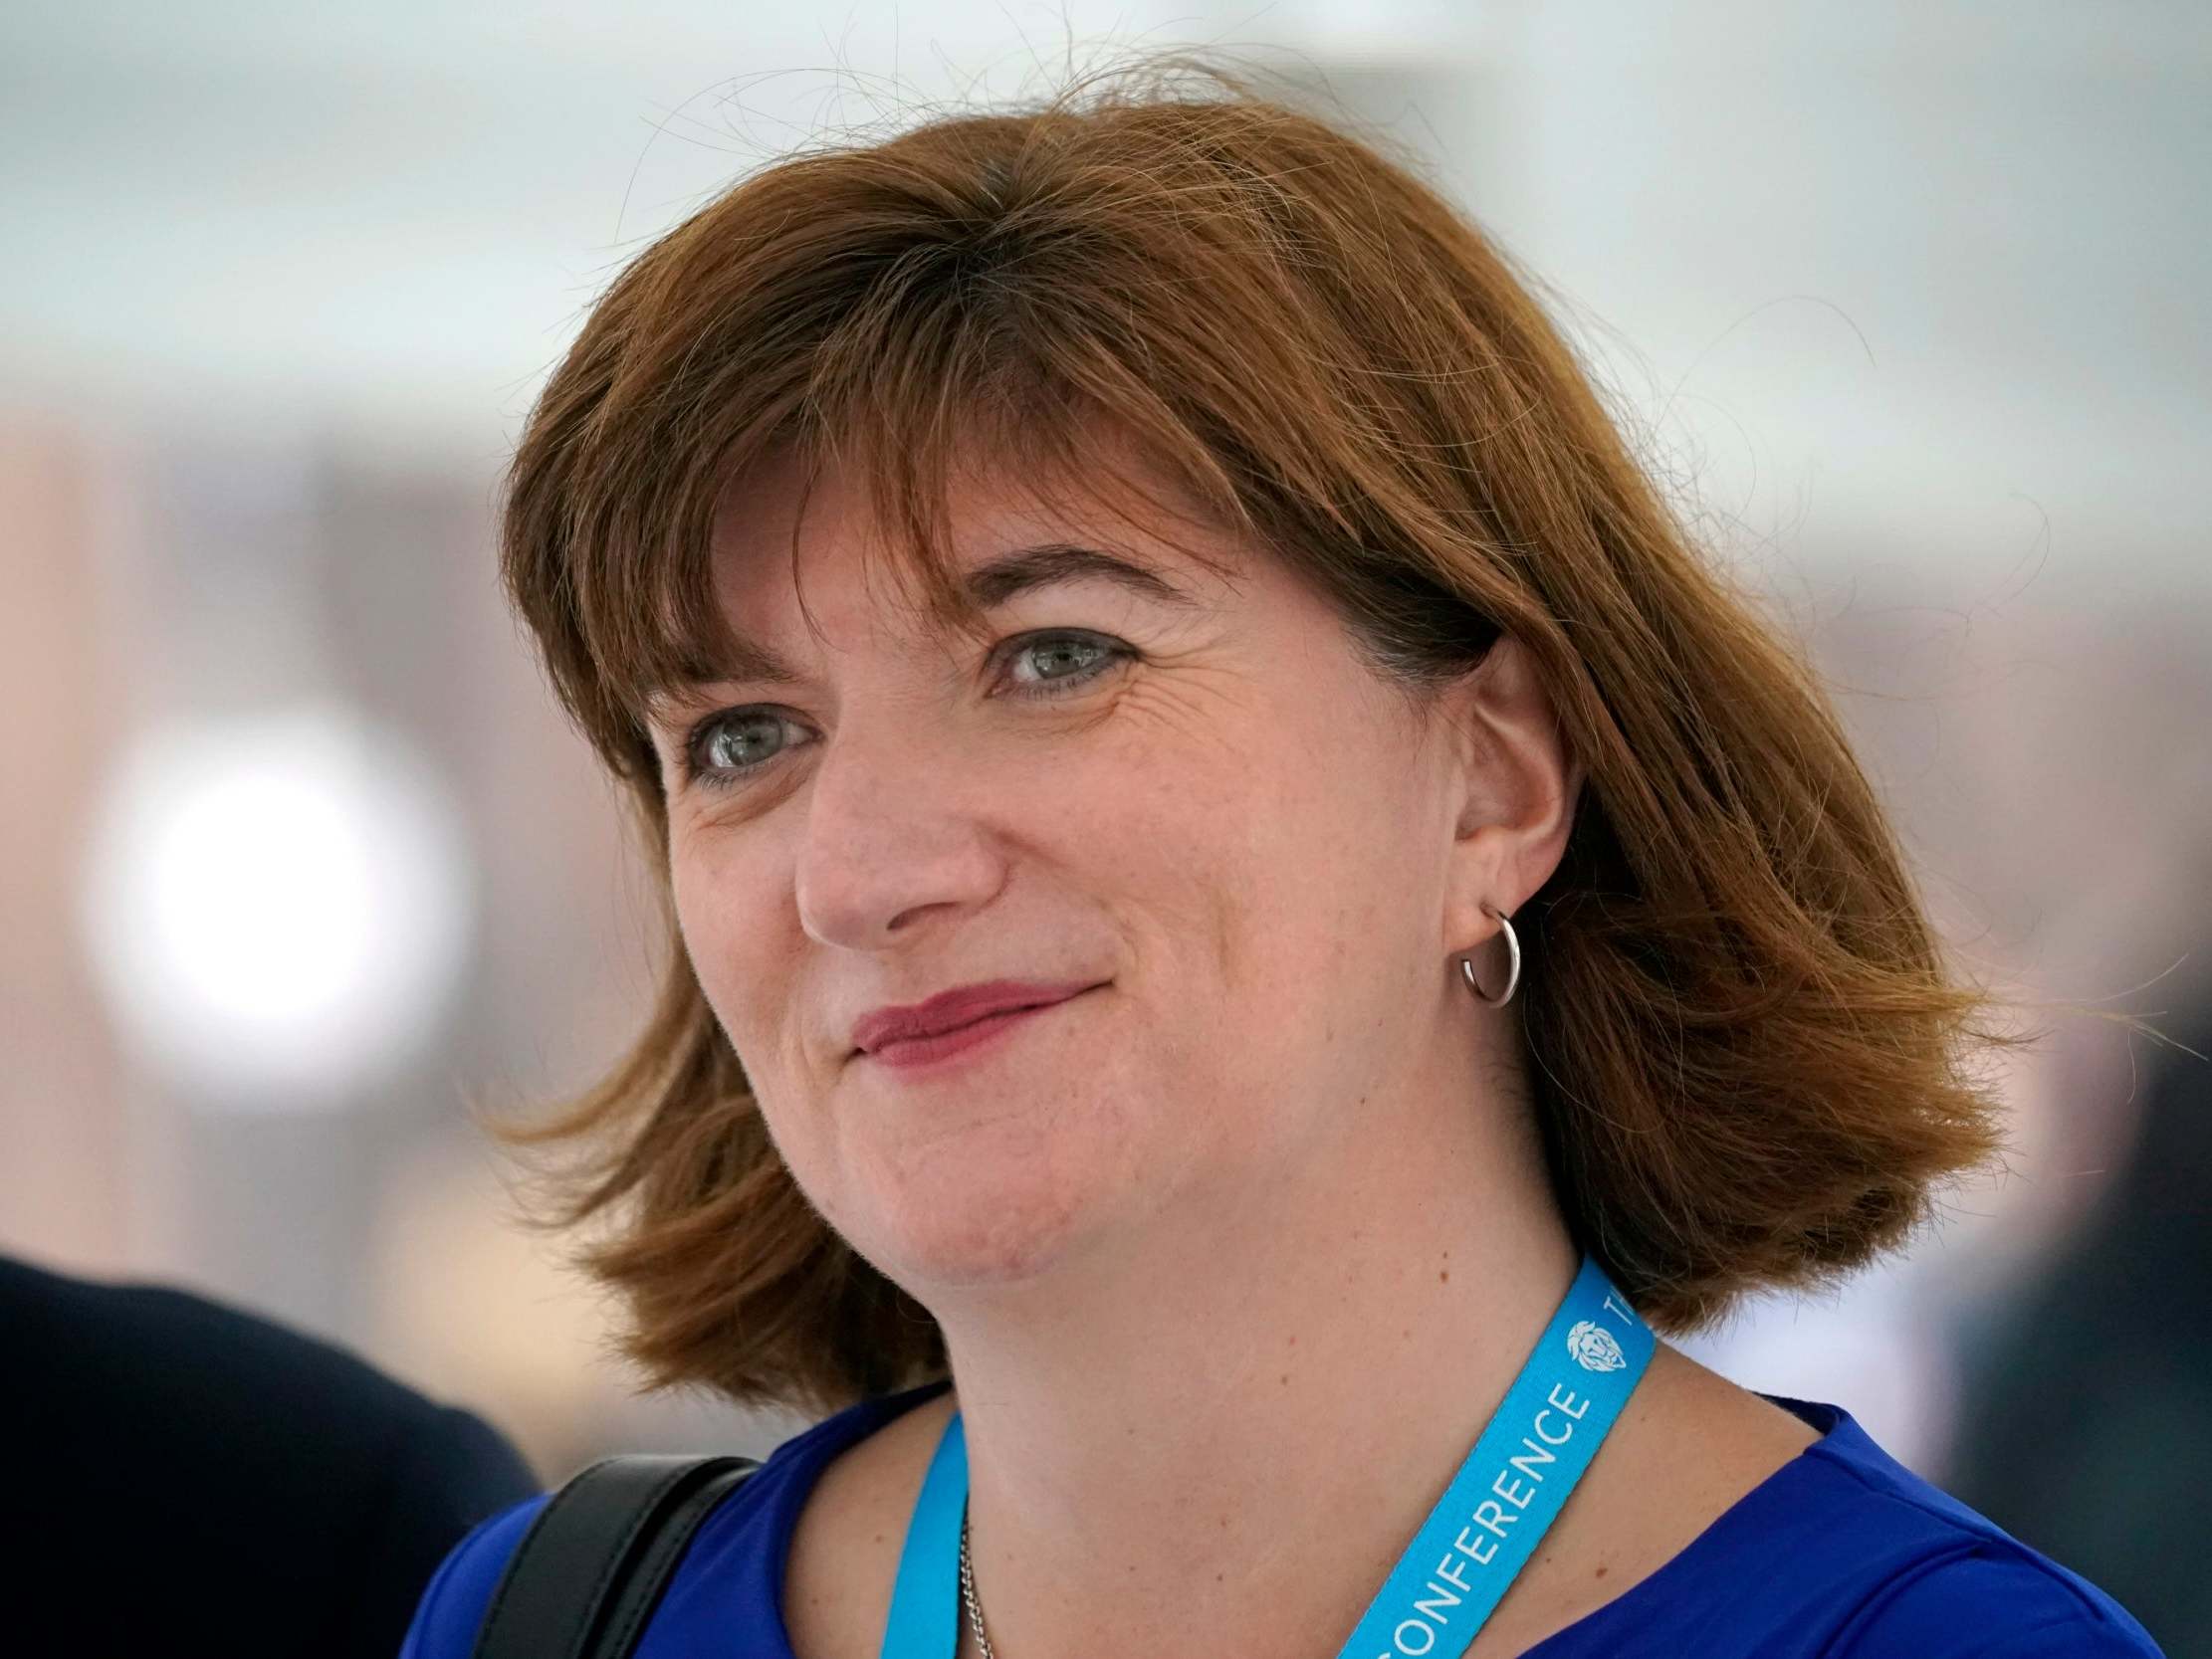 General election: Cabinet minister Nicky Morgan to stand down as MP